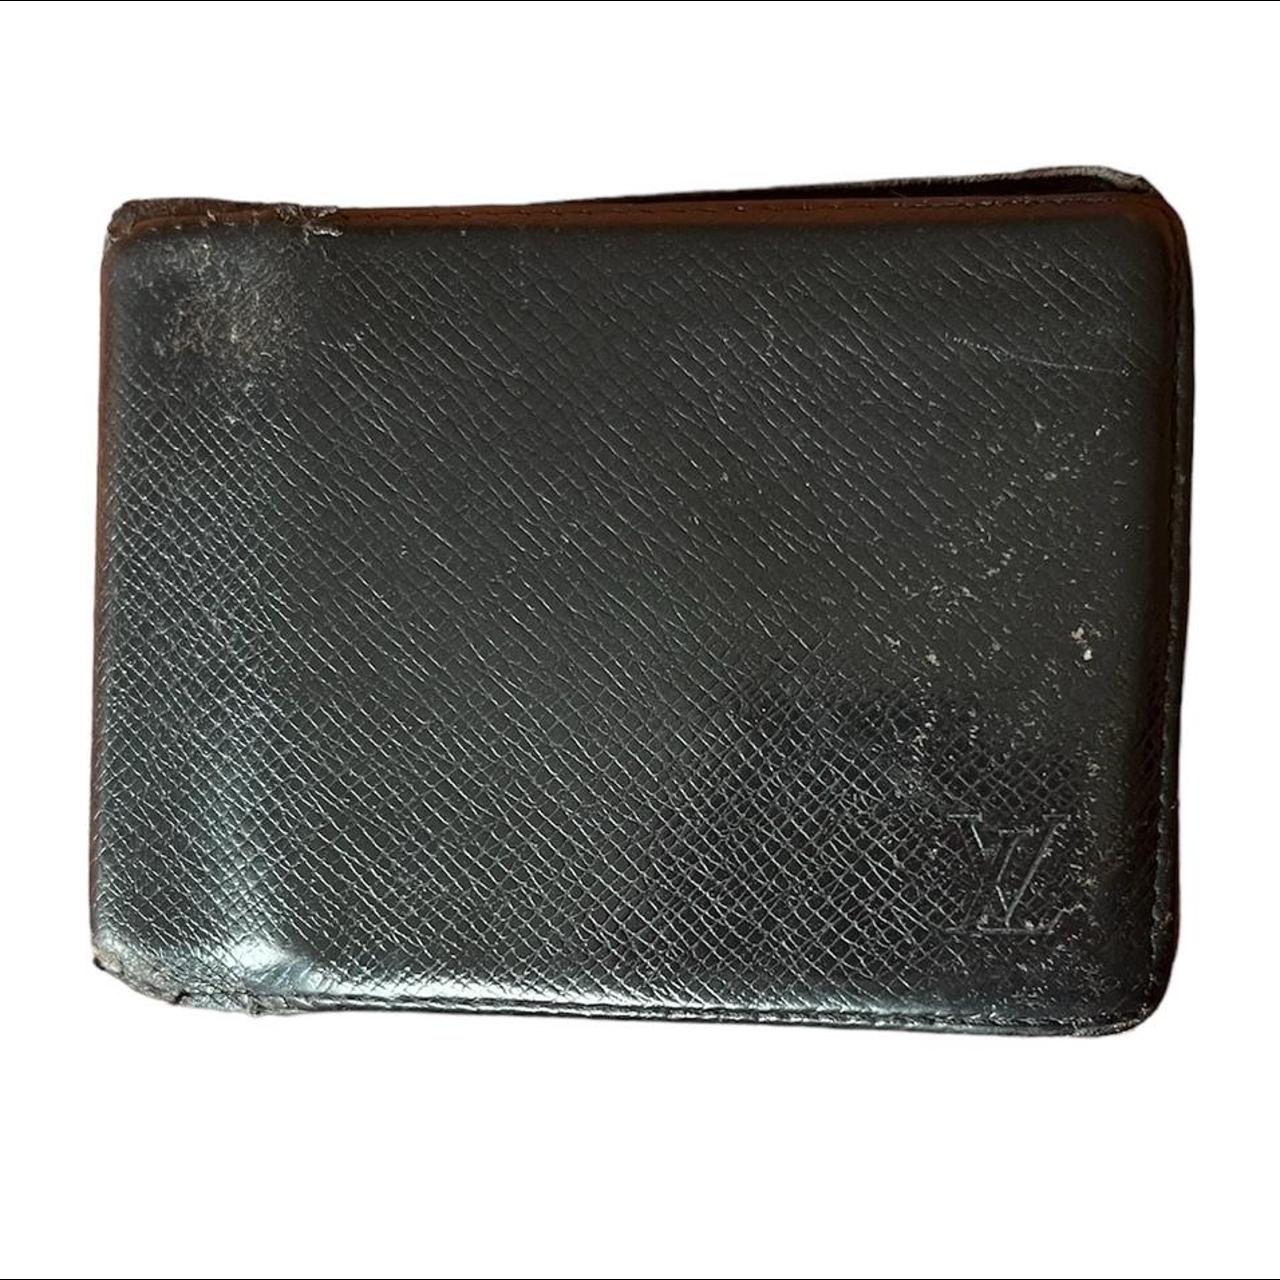 AUTHENTIC Louis Vuitton mens wallet. Extra fold for